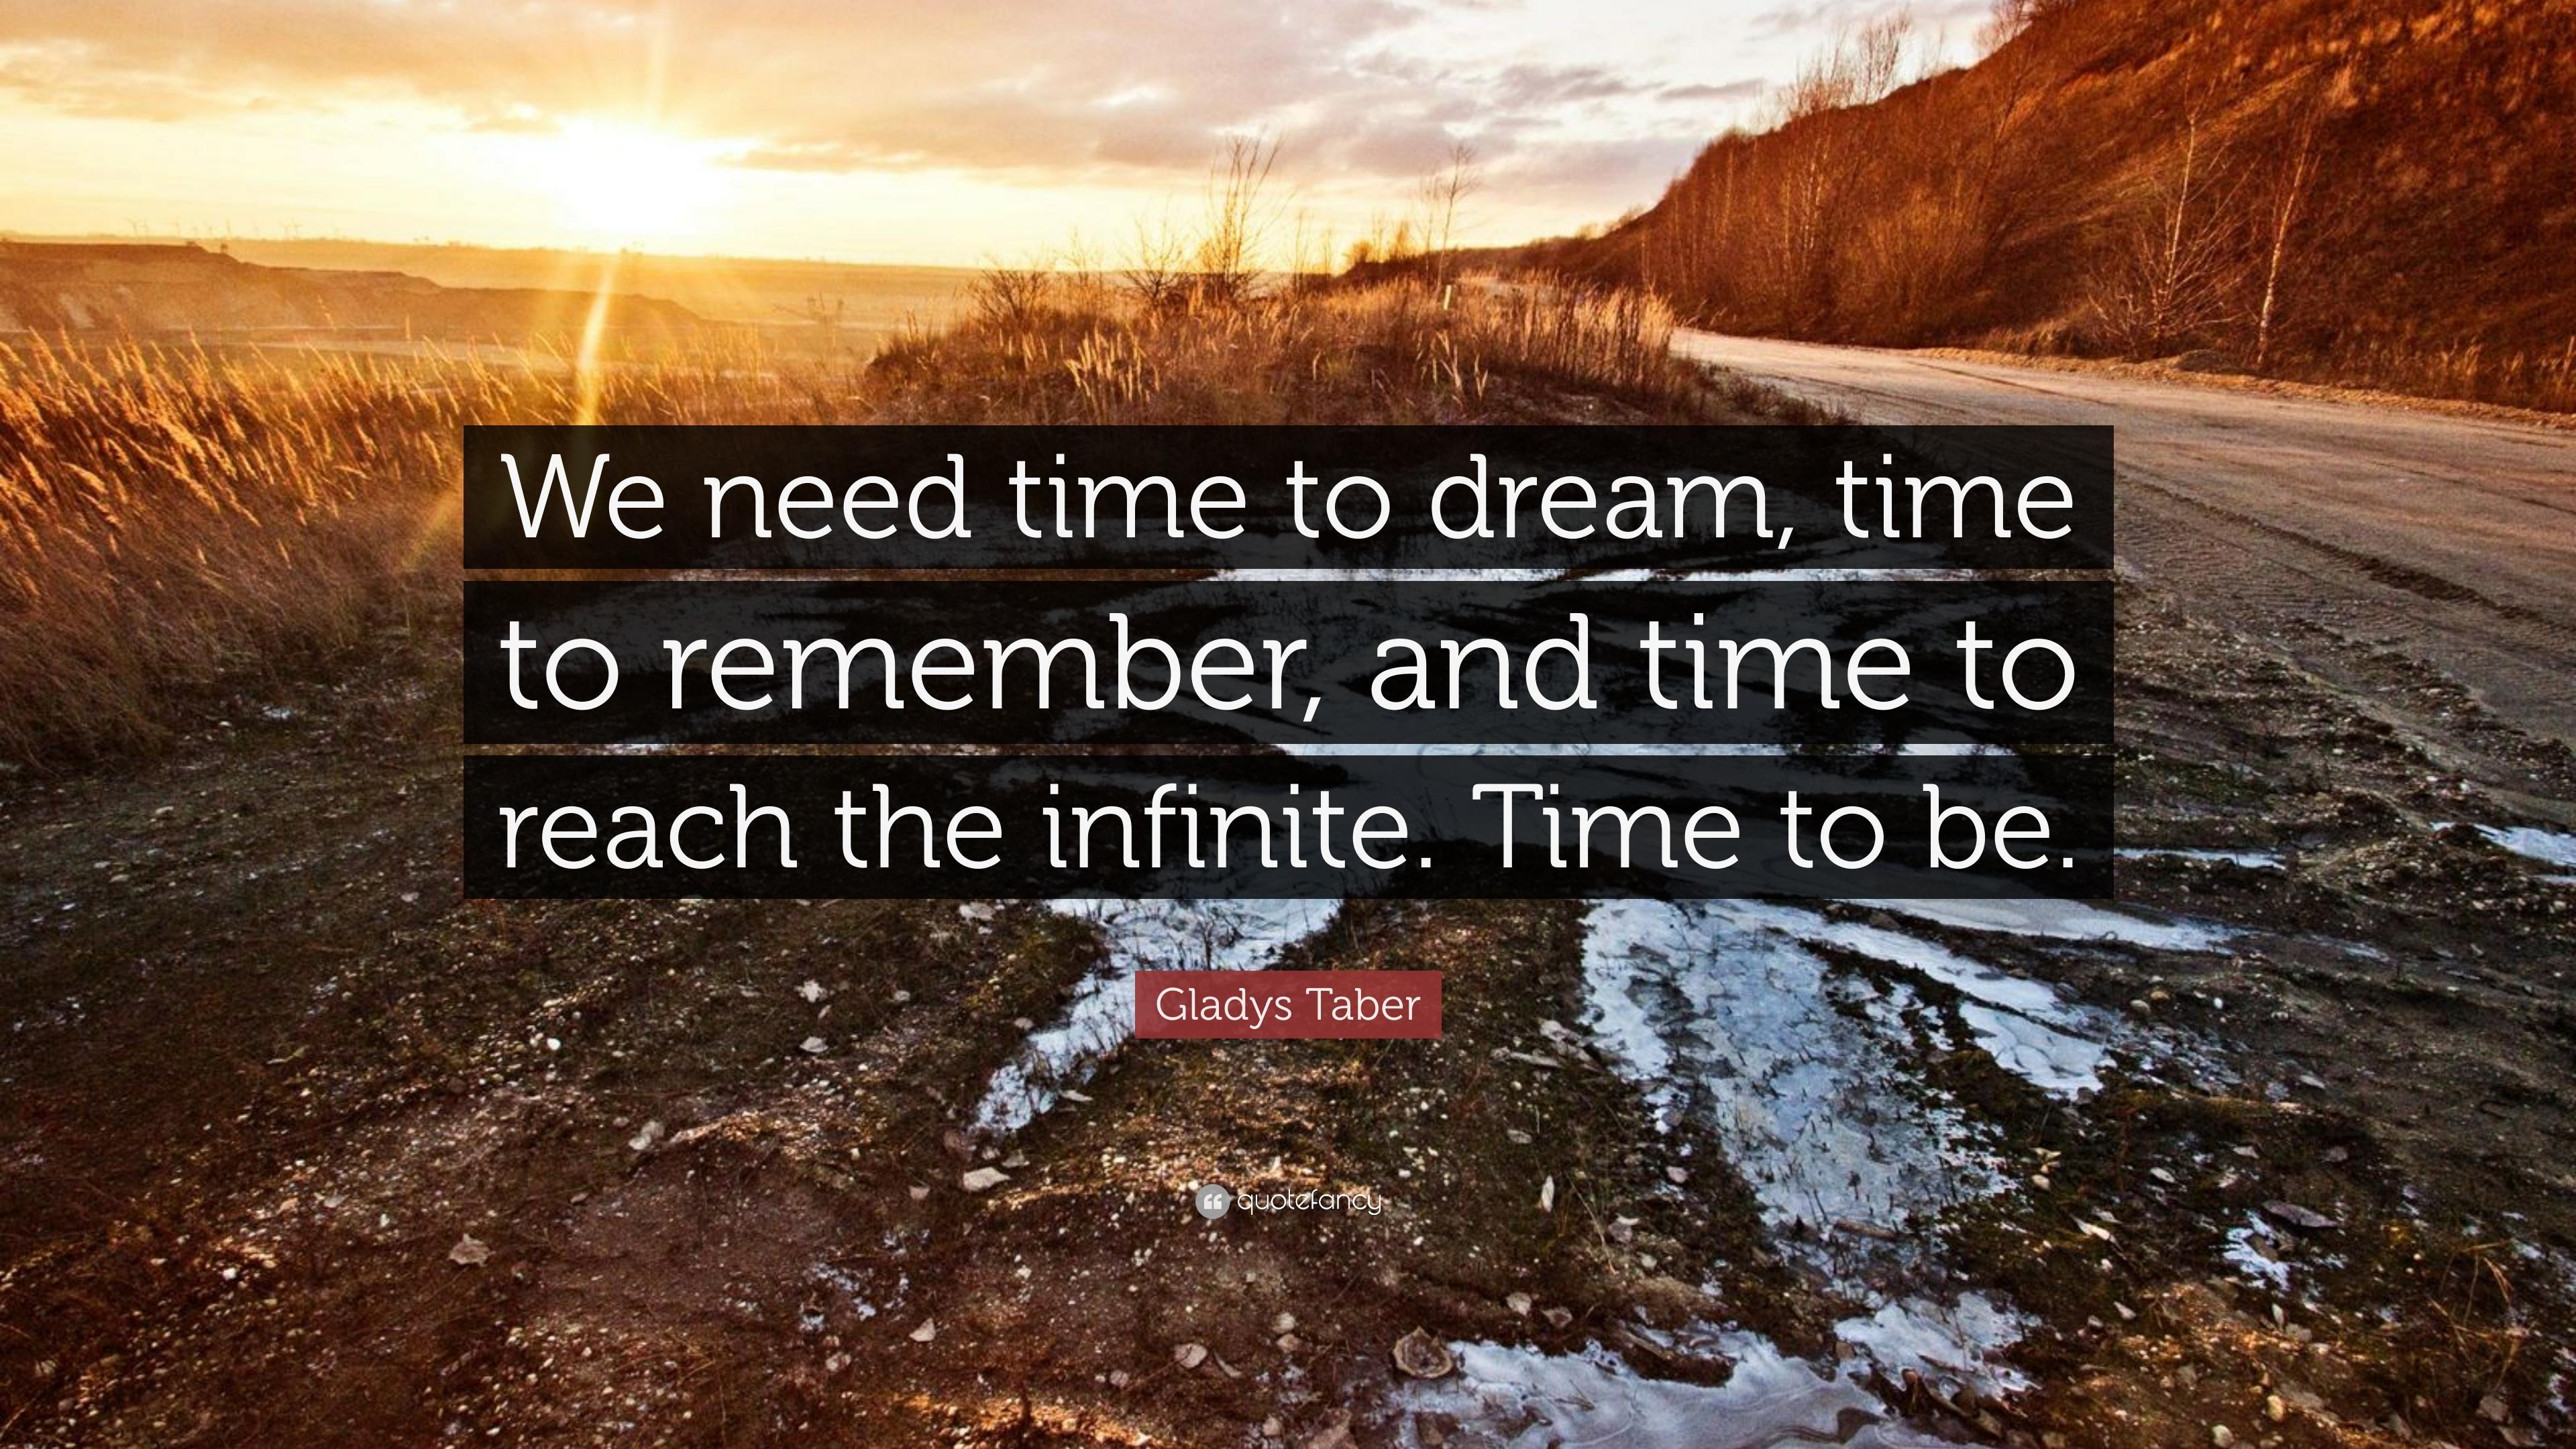 Gladys Taber Quote: “We need time to dream, time to remember